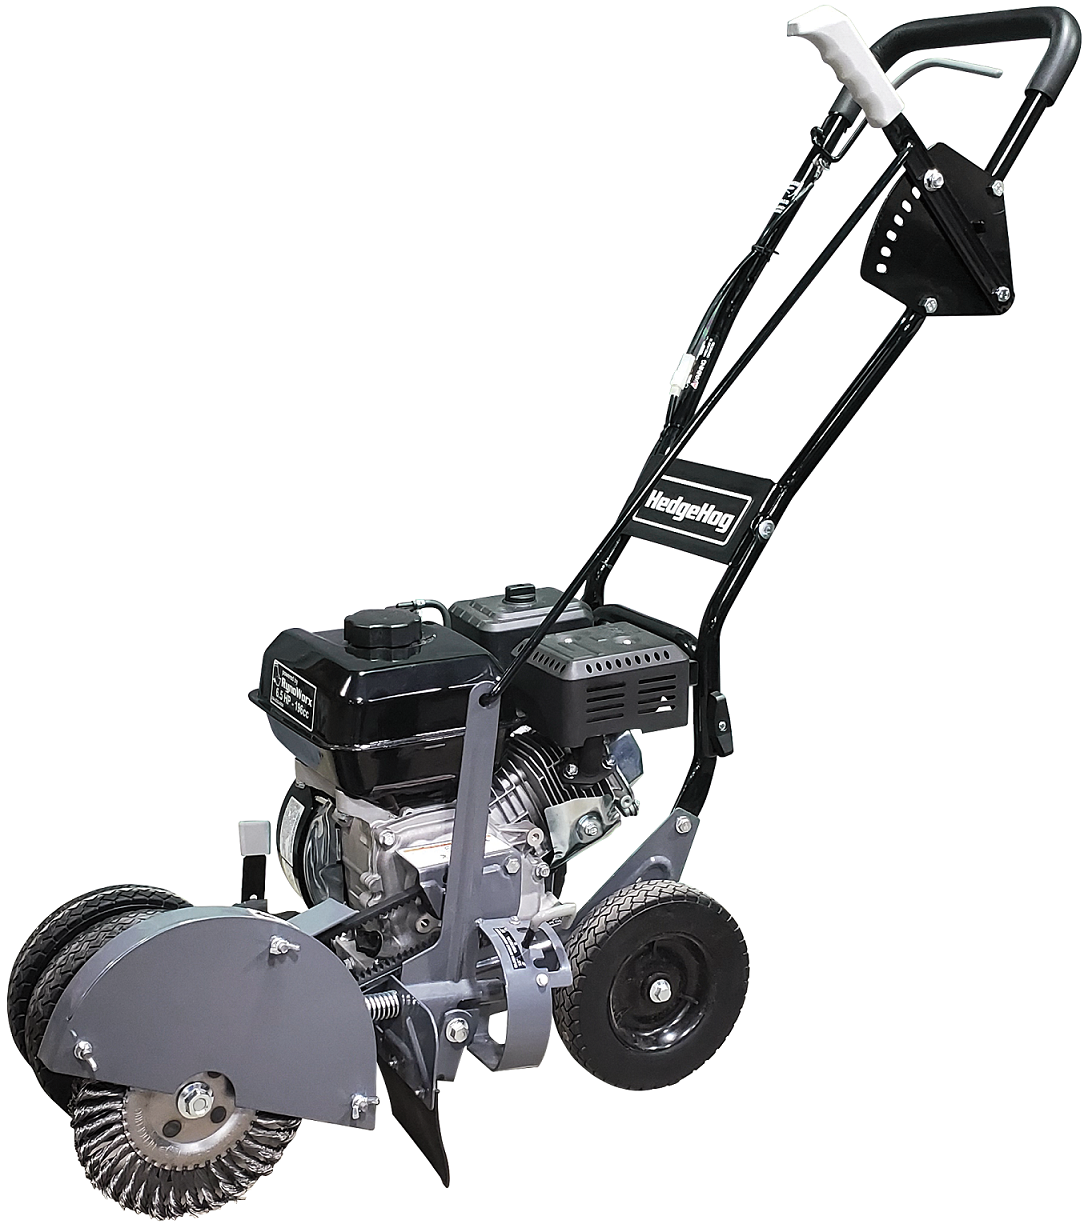 Hedgehog Lawn Edger with Crack Cleaning Kit - 6.5 HP 196 CC Engine